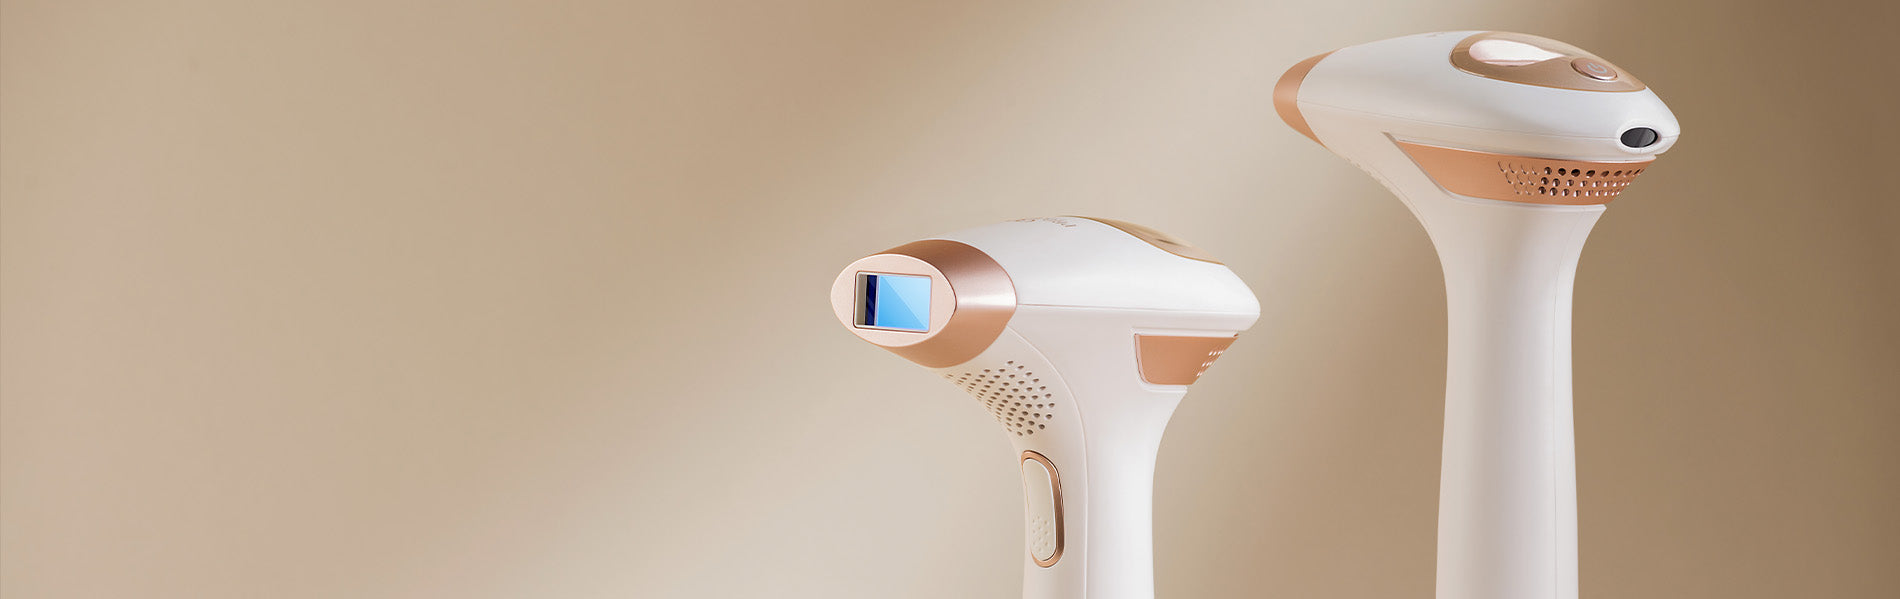 At Home Hair Removal: How To Use An IPL Device